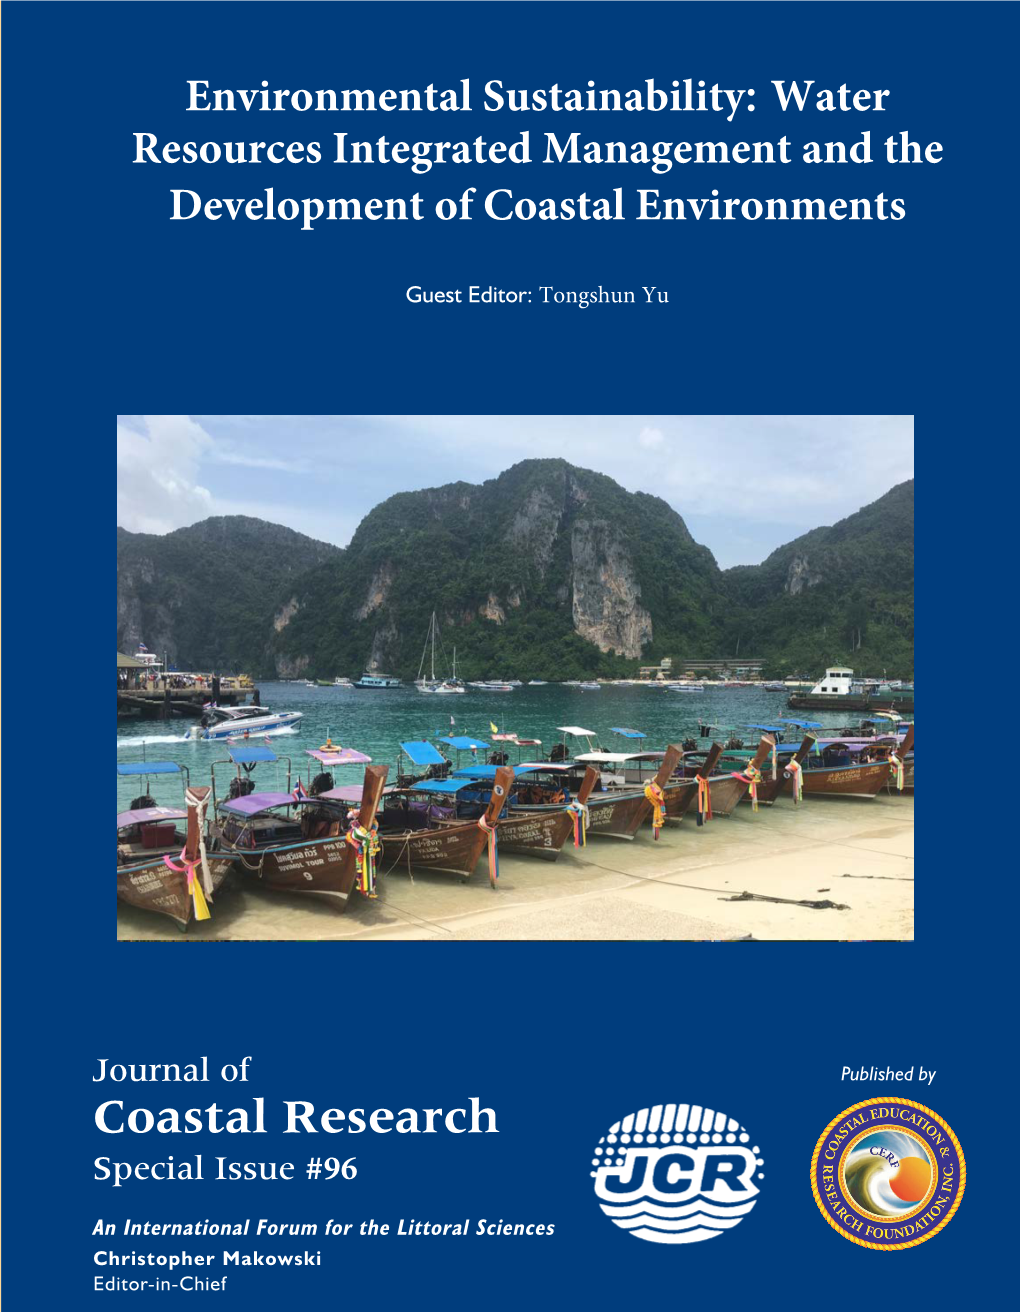 Coastal Research (JCR) CERF Environmental Sustainability: Water